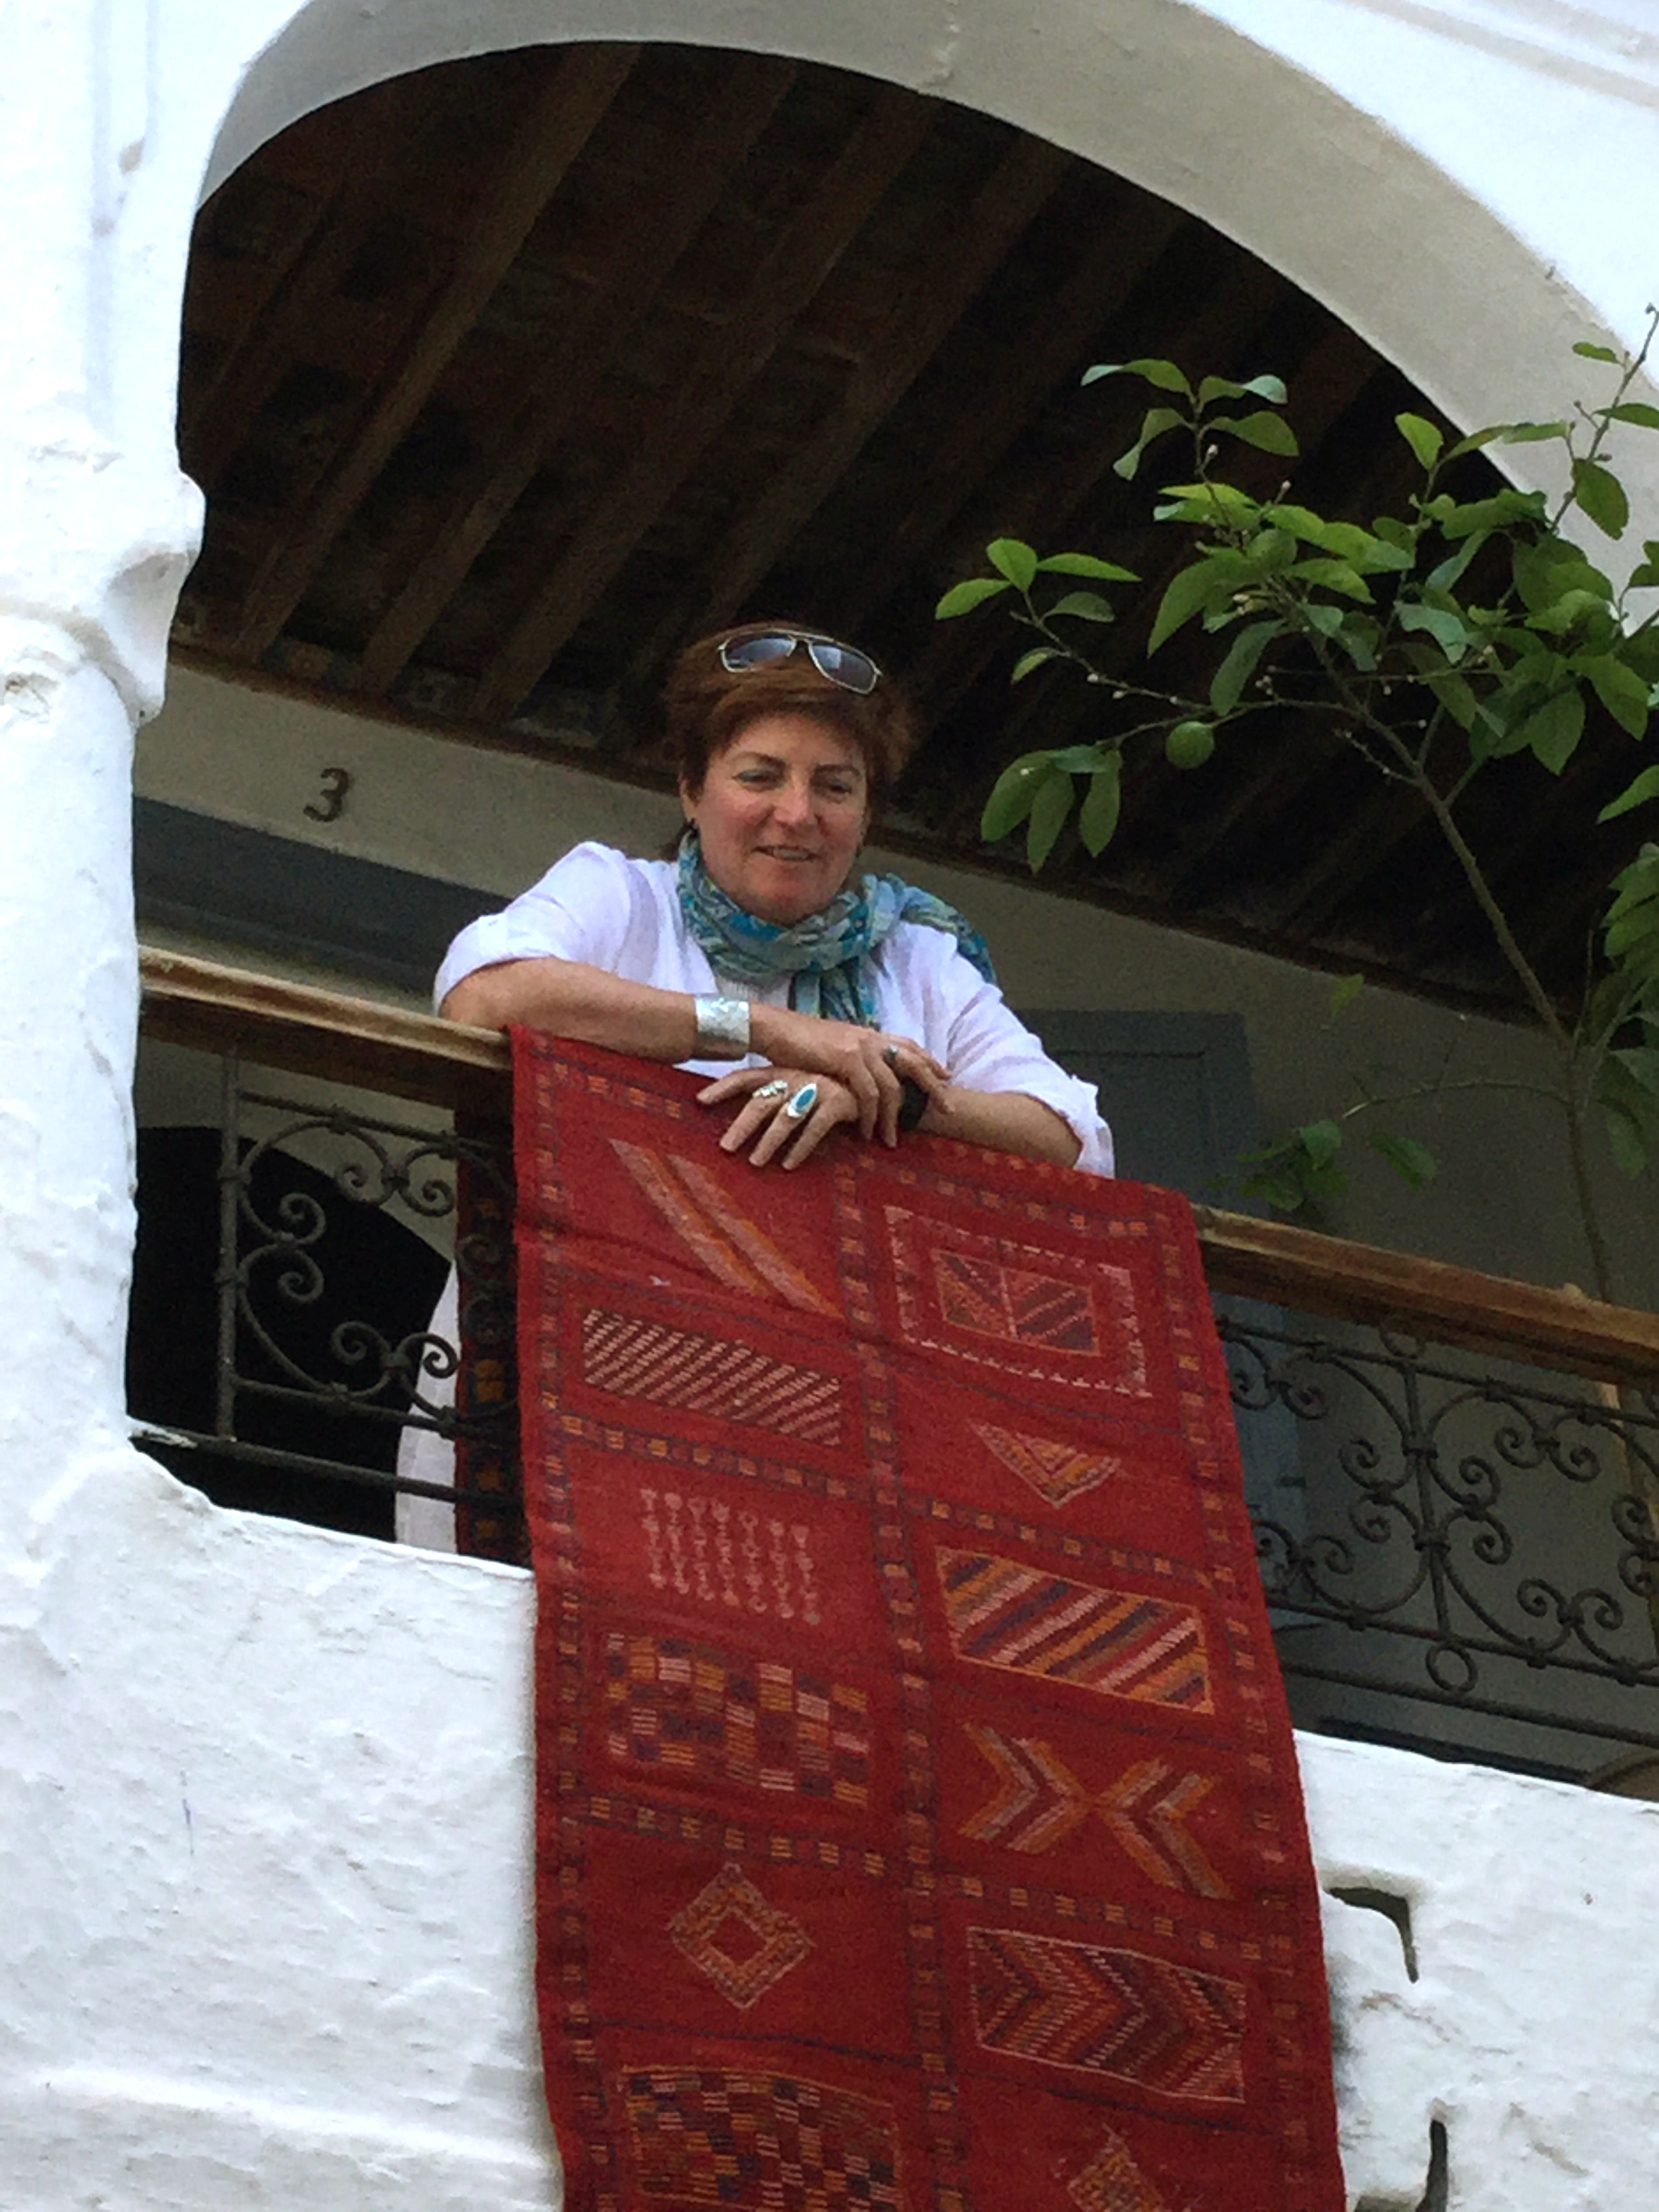 Niccy Pallant in Chefchaouen